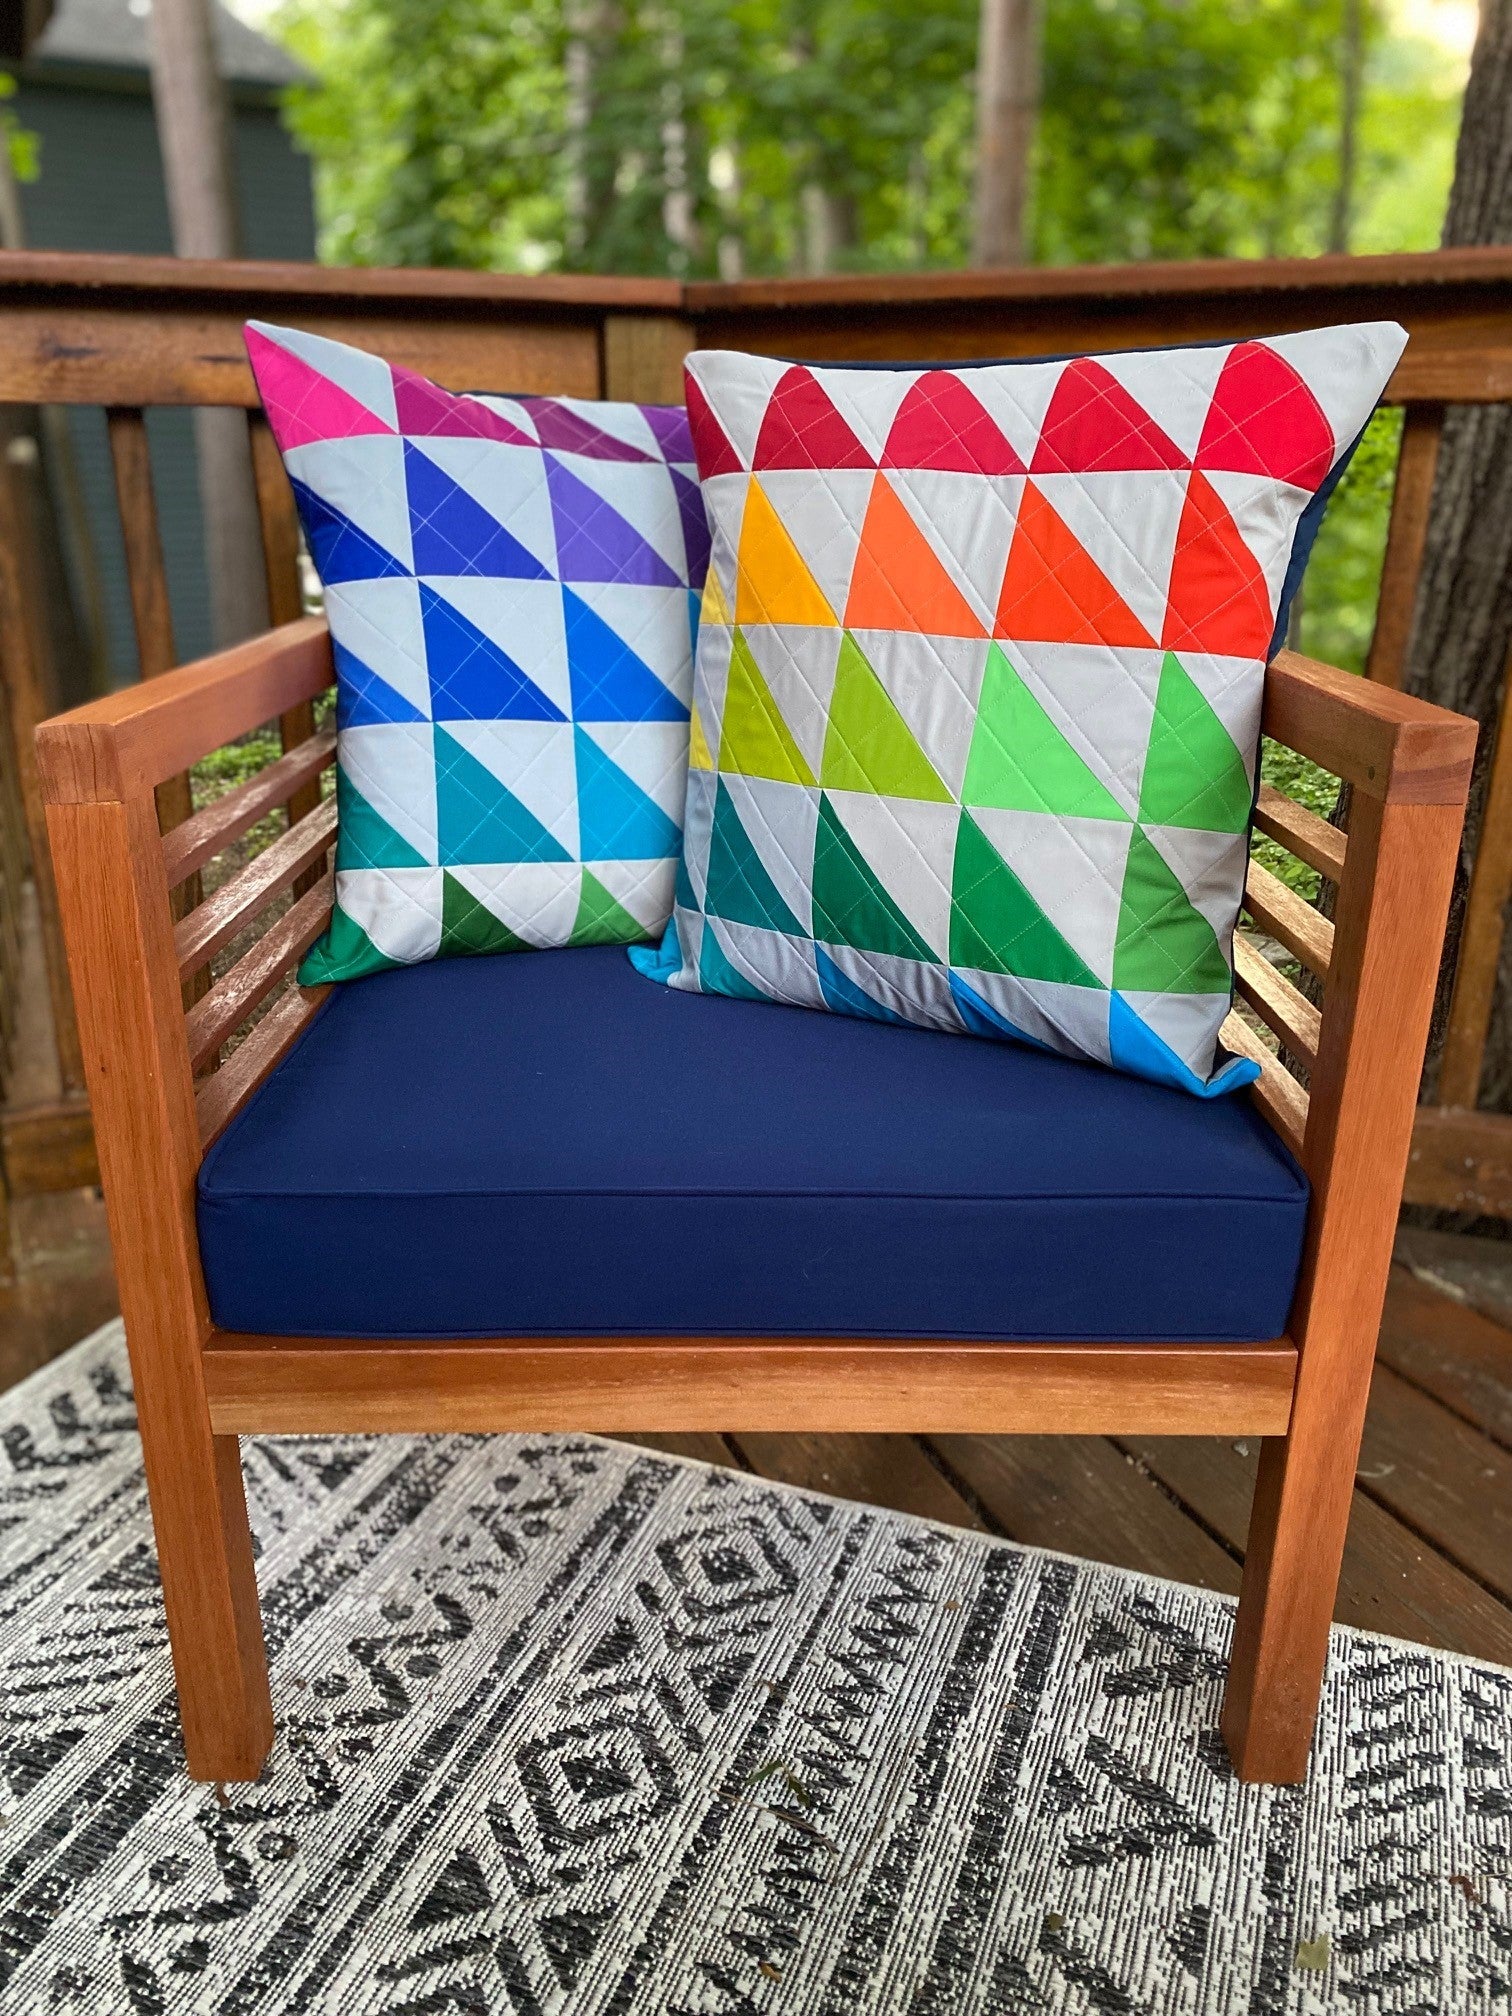 Quilted Pillows (Square)